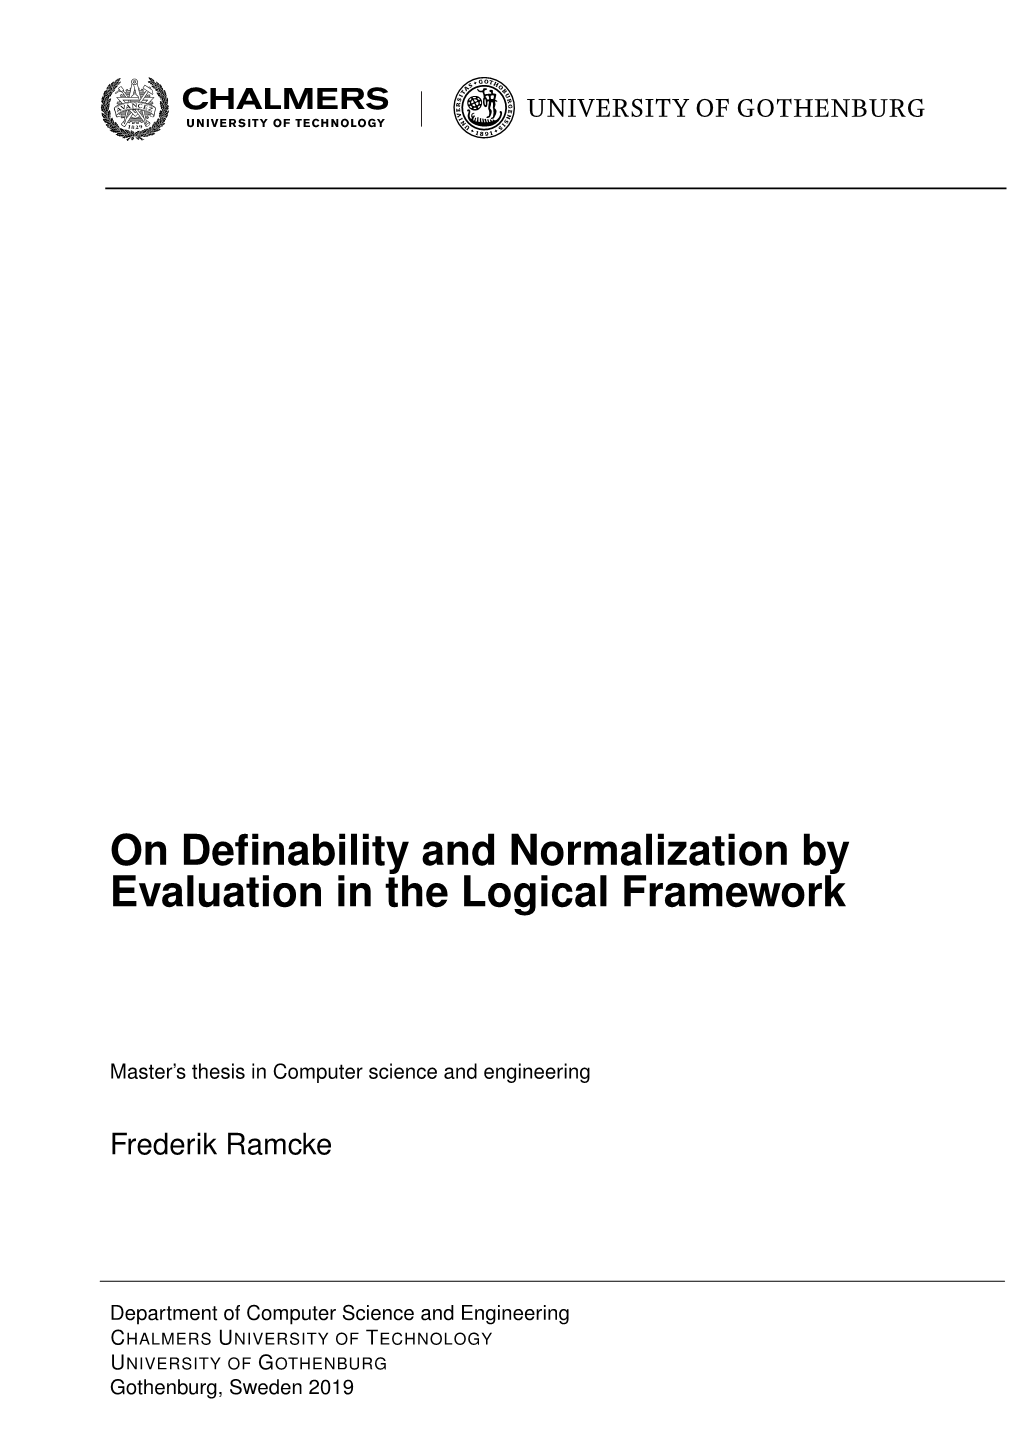 On Definability and Normalization by Evaluation in the Logical Framework